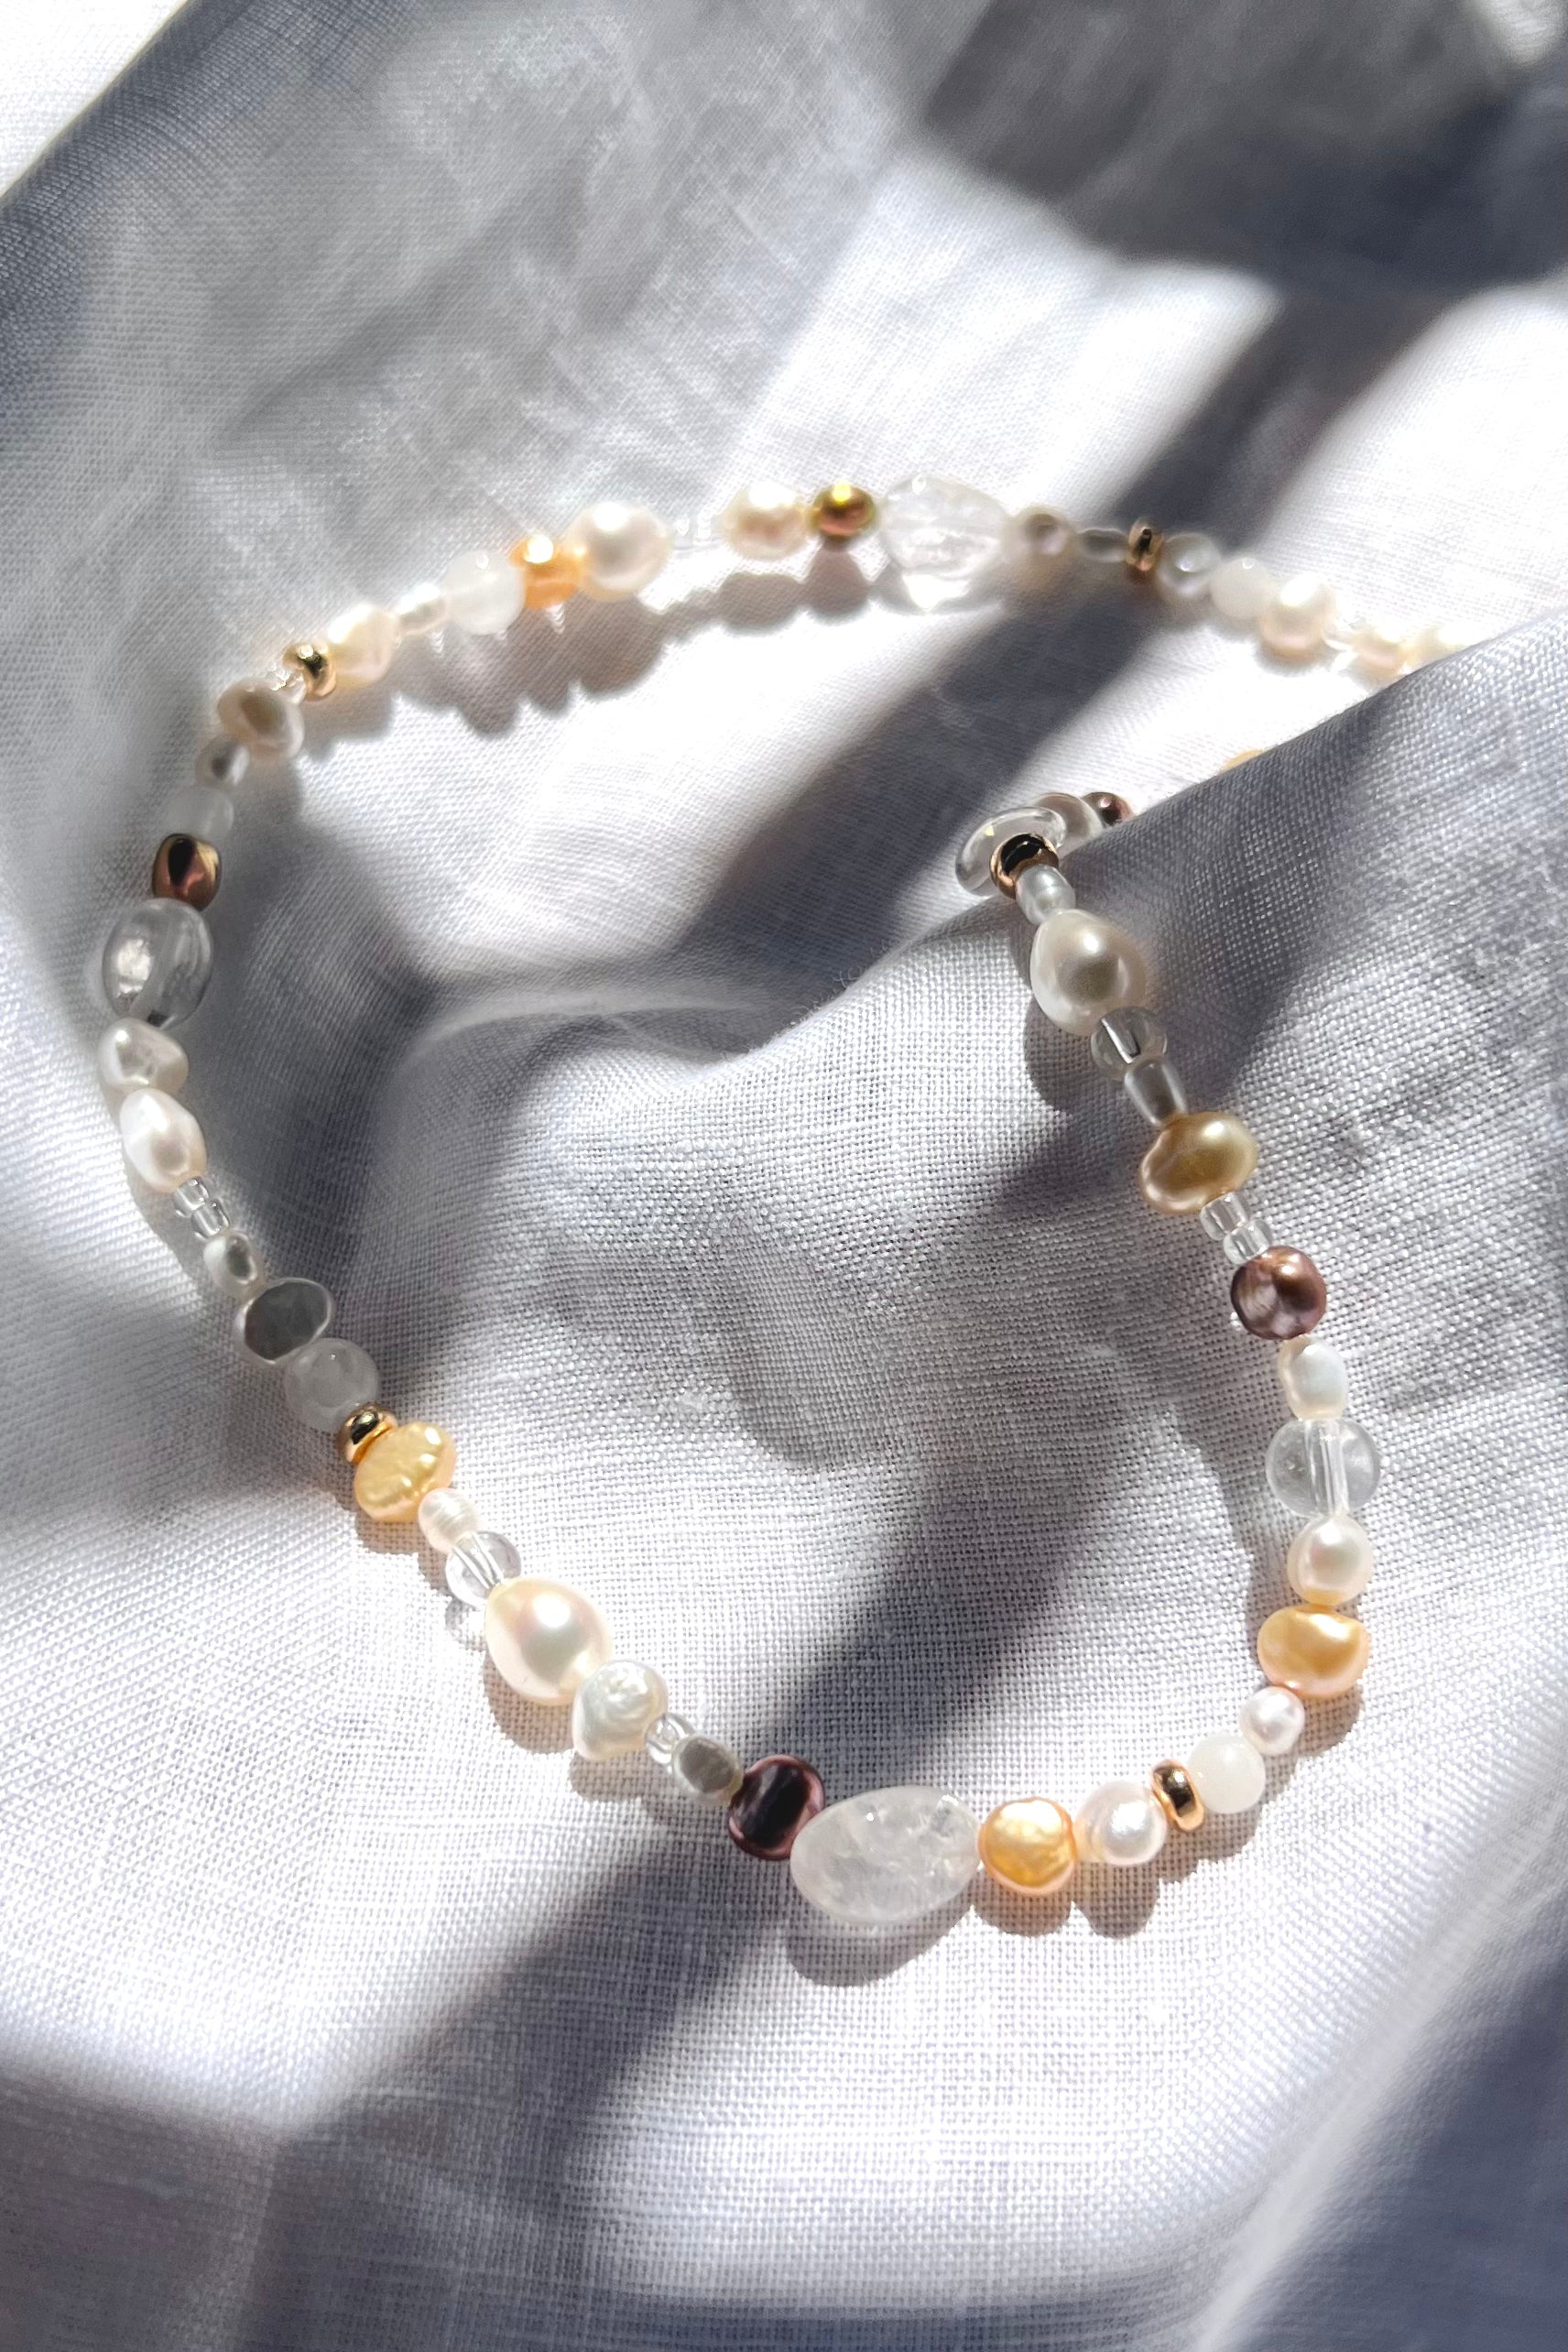 Nova bead necklace placed on top of a white linen. The necklace follows the curves and flow of the linen, showcasing subtle sparkle from the beads.